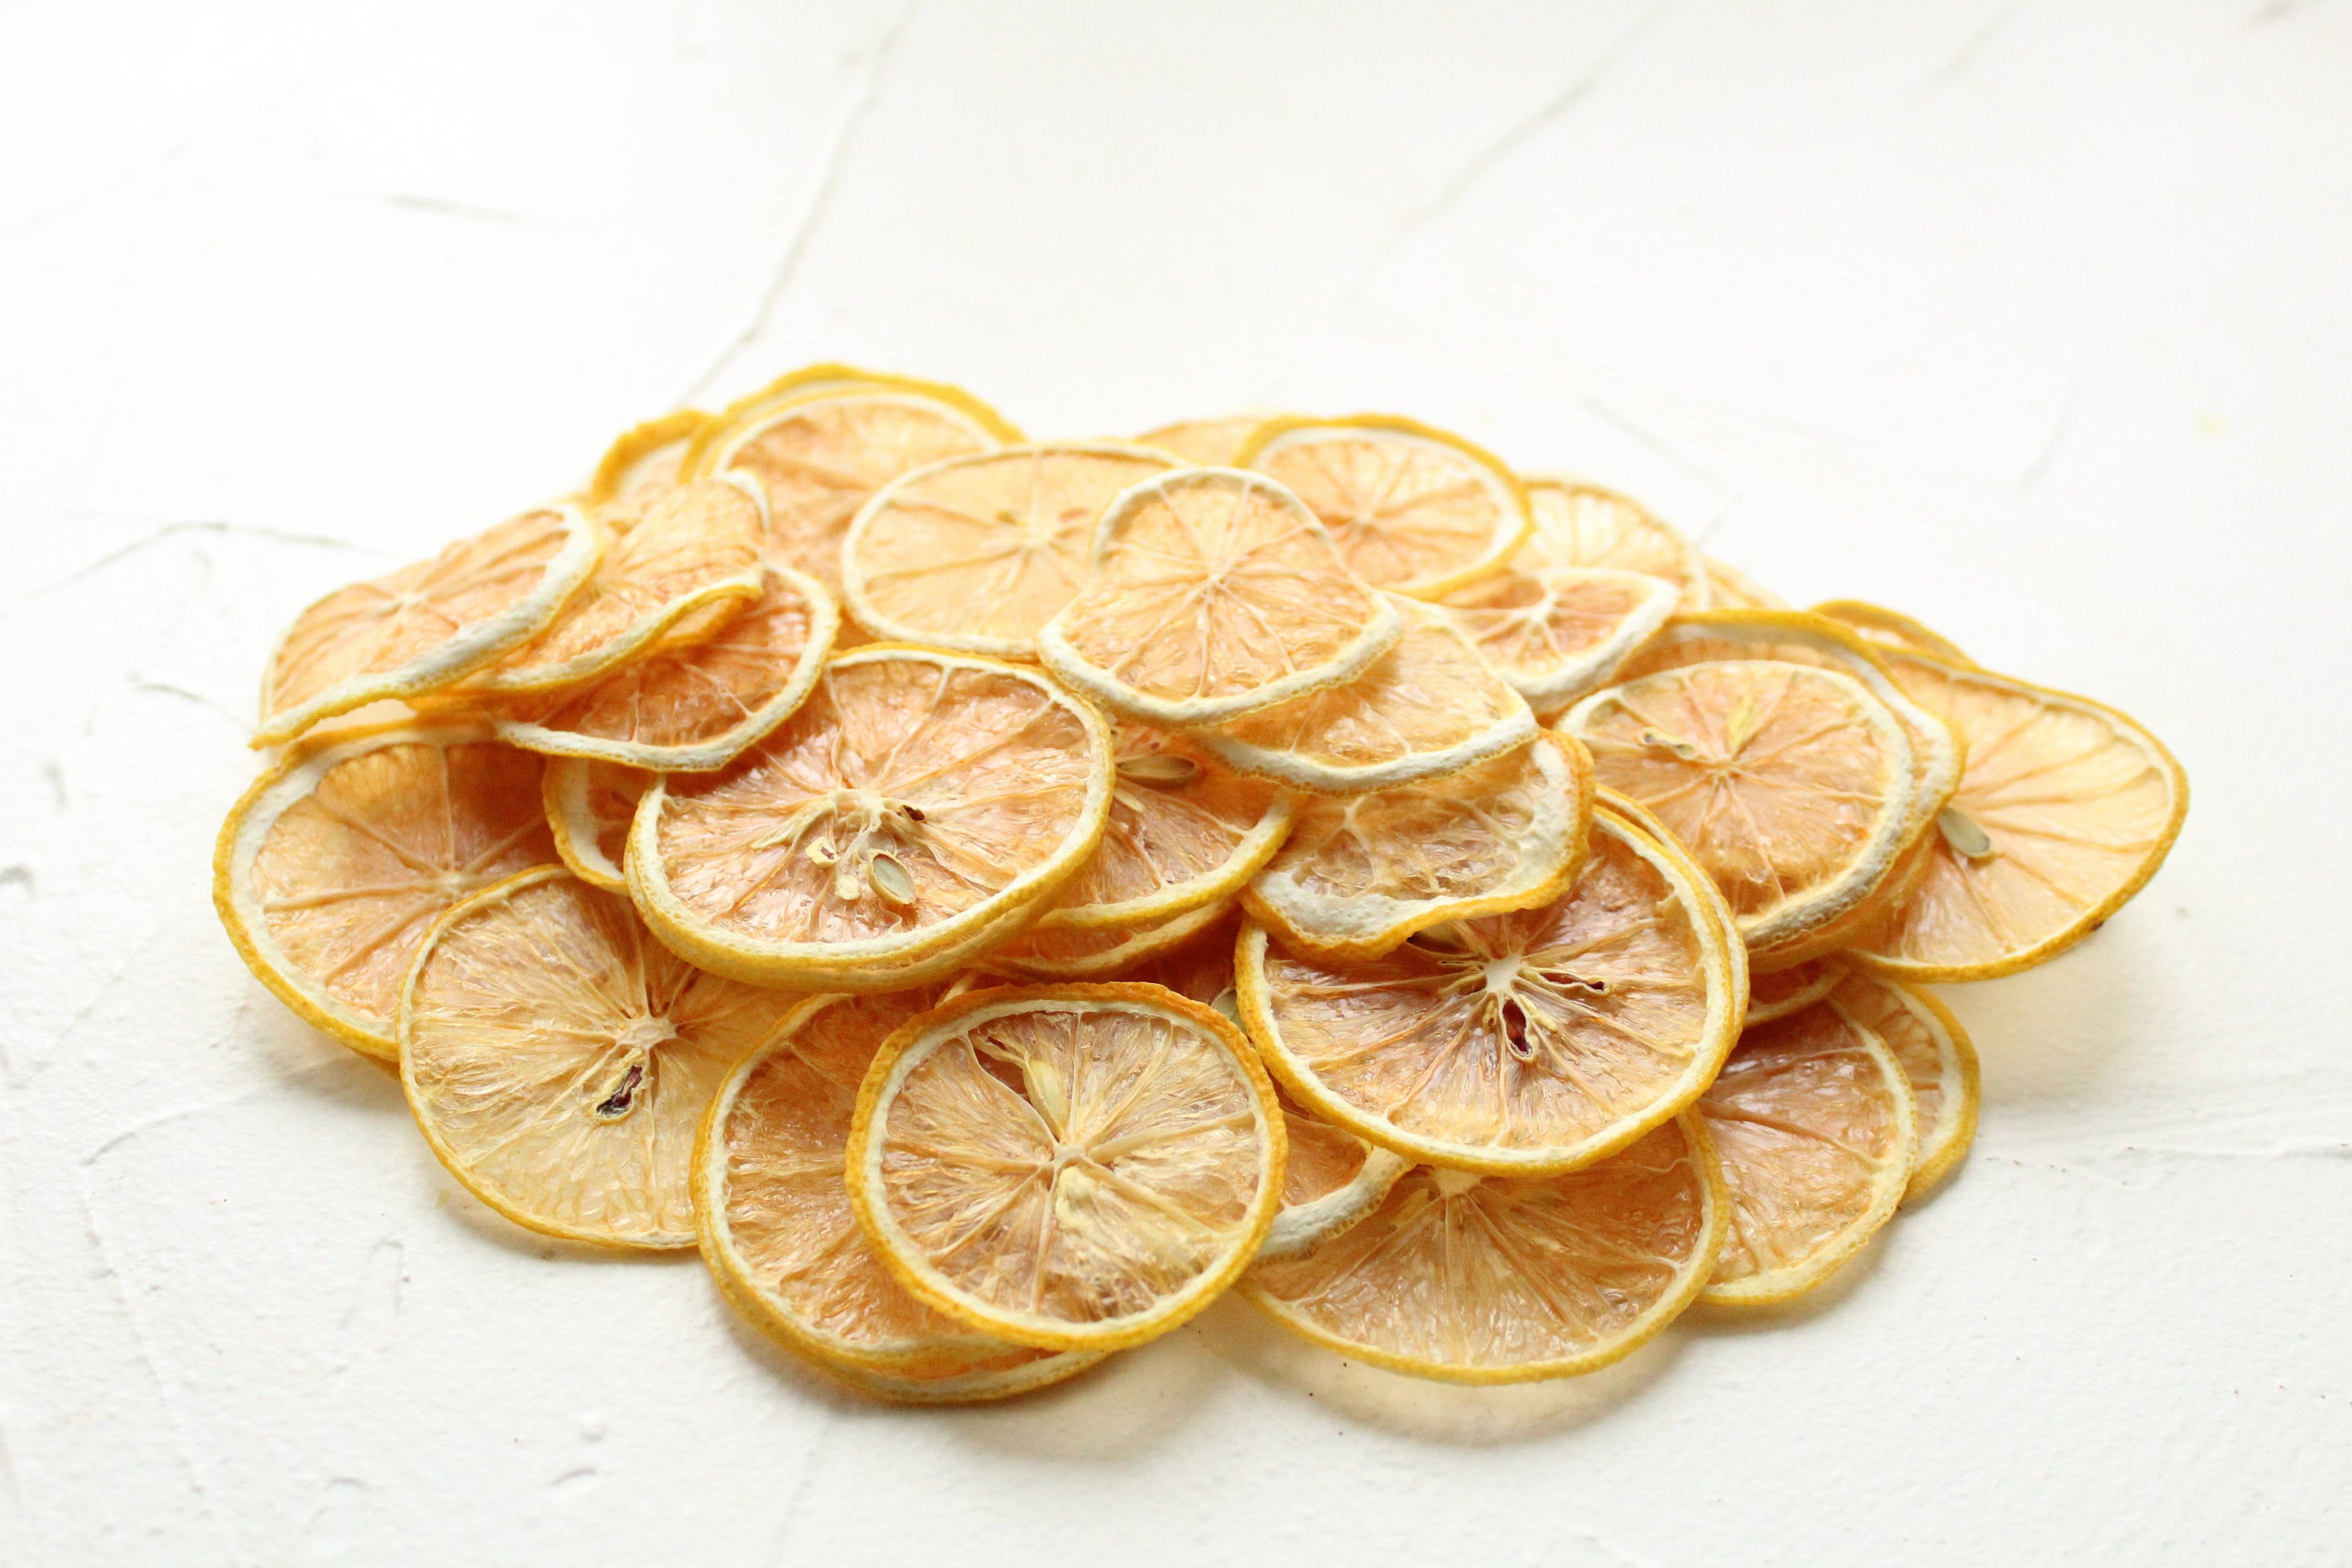 Browse Free HD Images of Two Large Jars Of Dried Lemon Slices